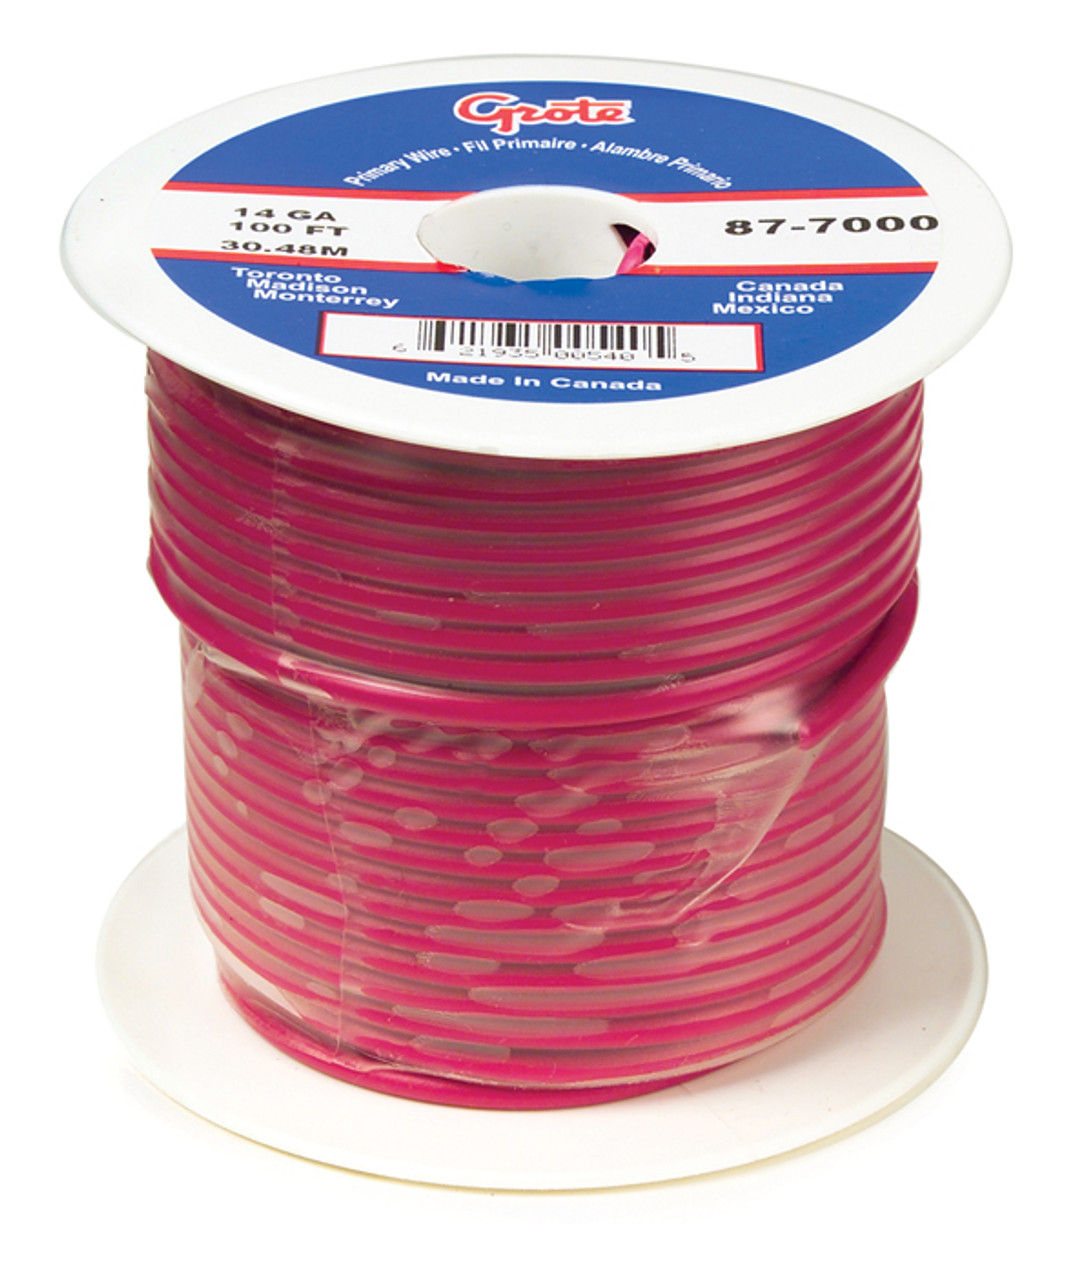 18 AWG General Purpose Thermo Plastic Wire @ 1000' - Red  88-9000